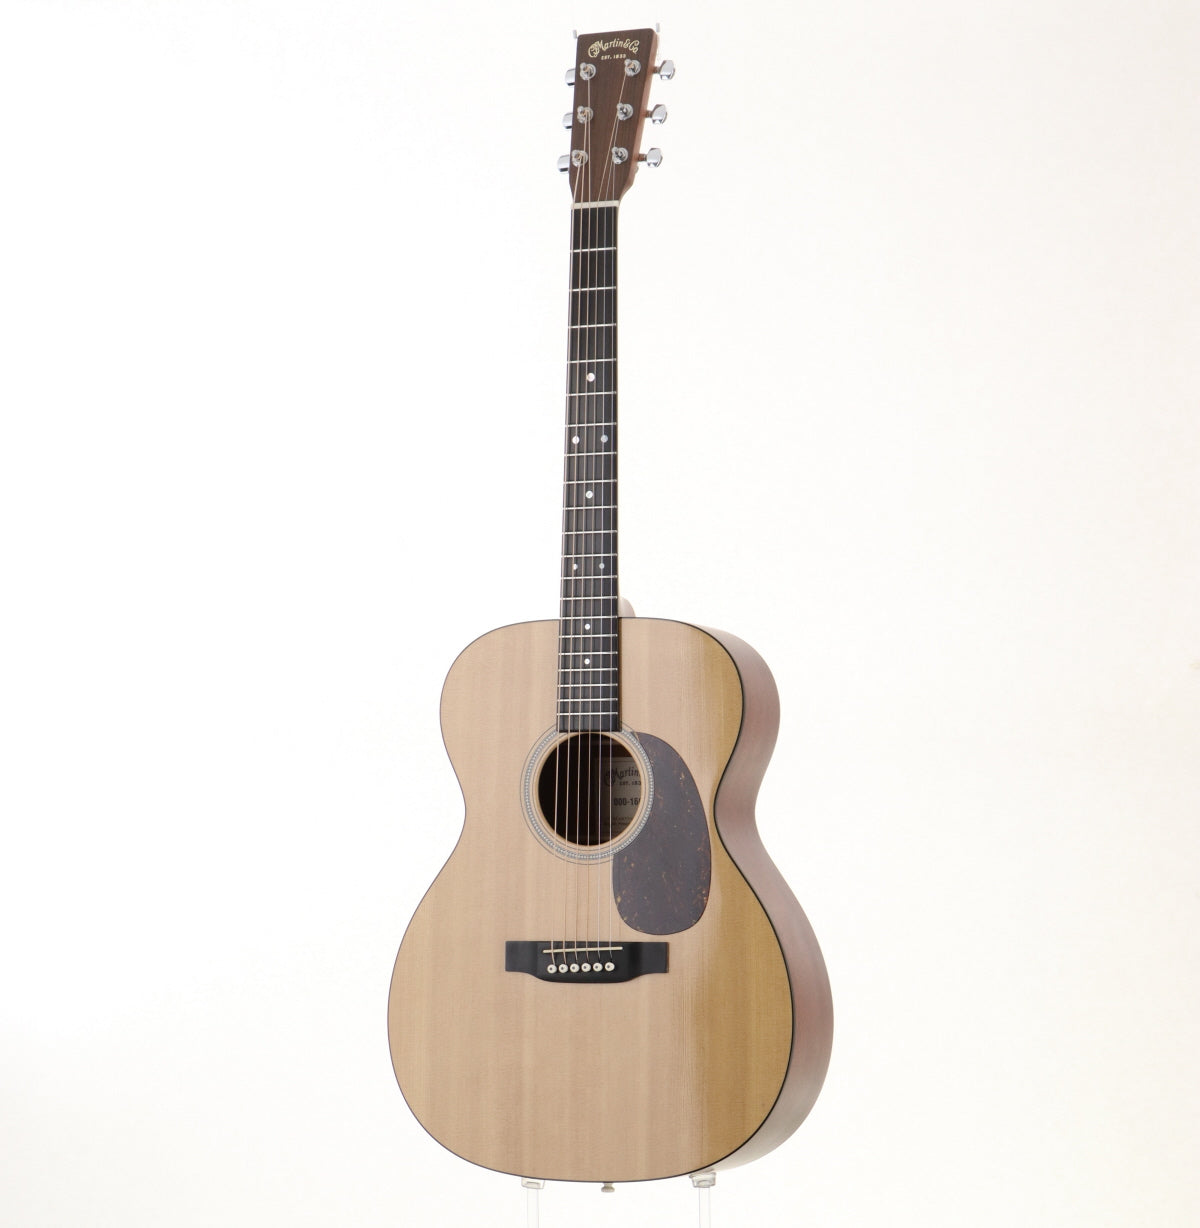 [SN 1228930] USED Martin / 000-16GT [2007] Martin Martin Acoustic Guitar Acoustic Guitar OOO-16GT [08]